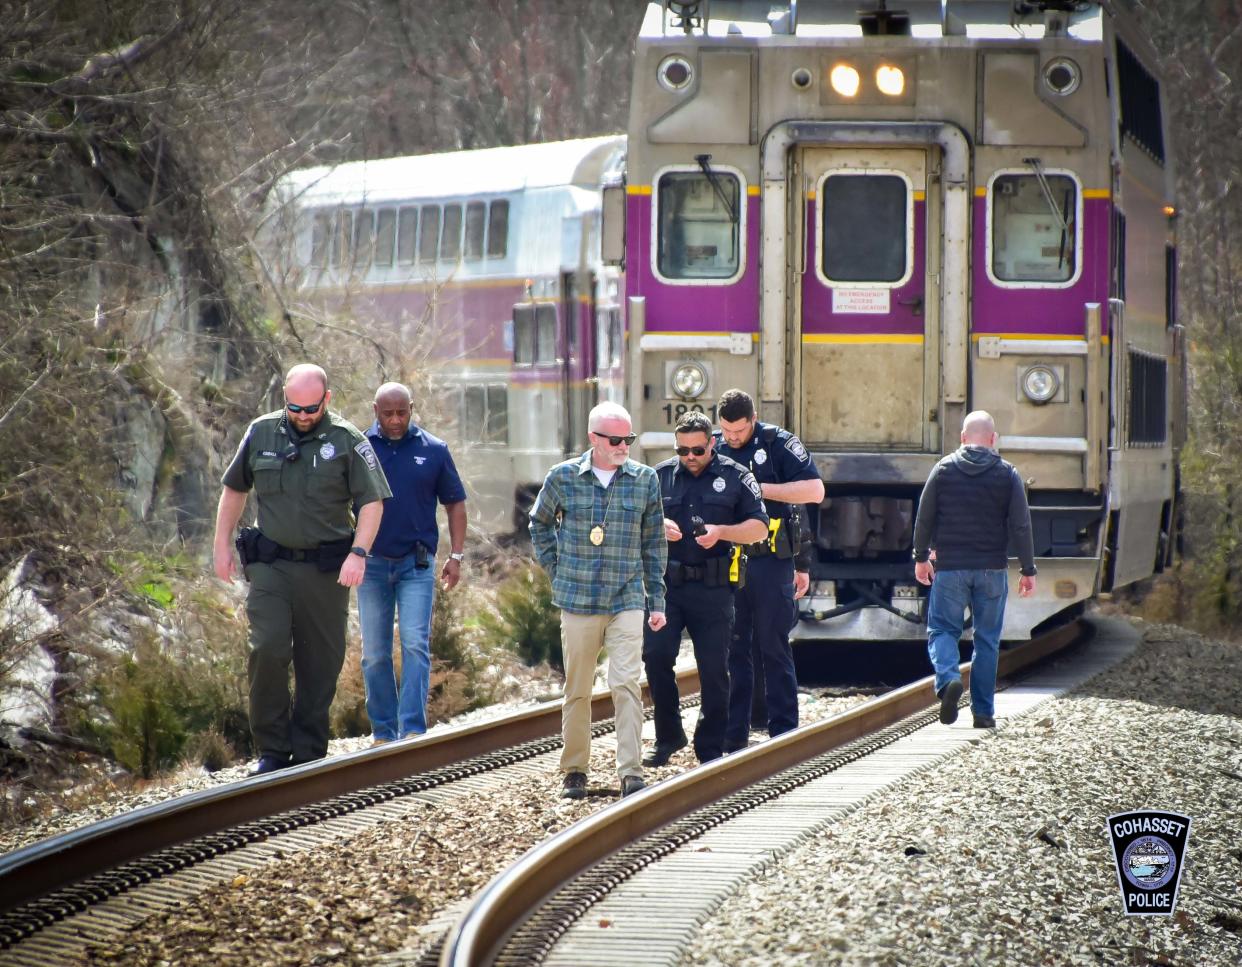 A commuter rail train going through Cohasset on Tuesday morning was forced to stop to avoid hitting a woman on the tracks.